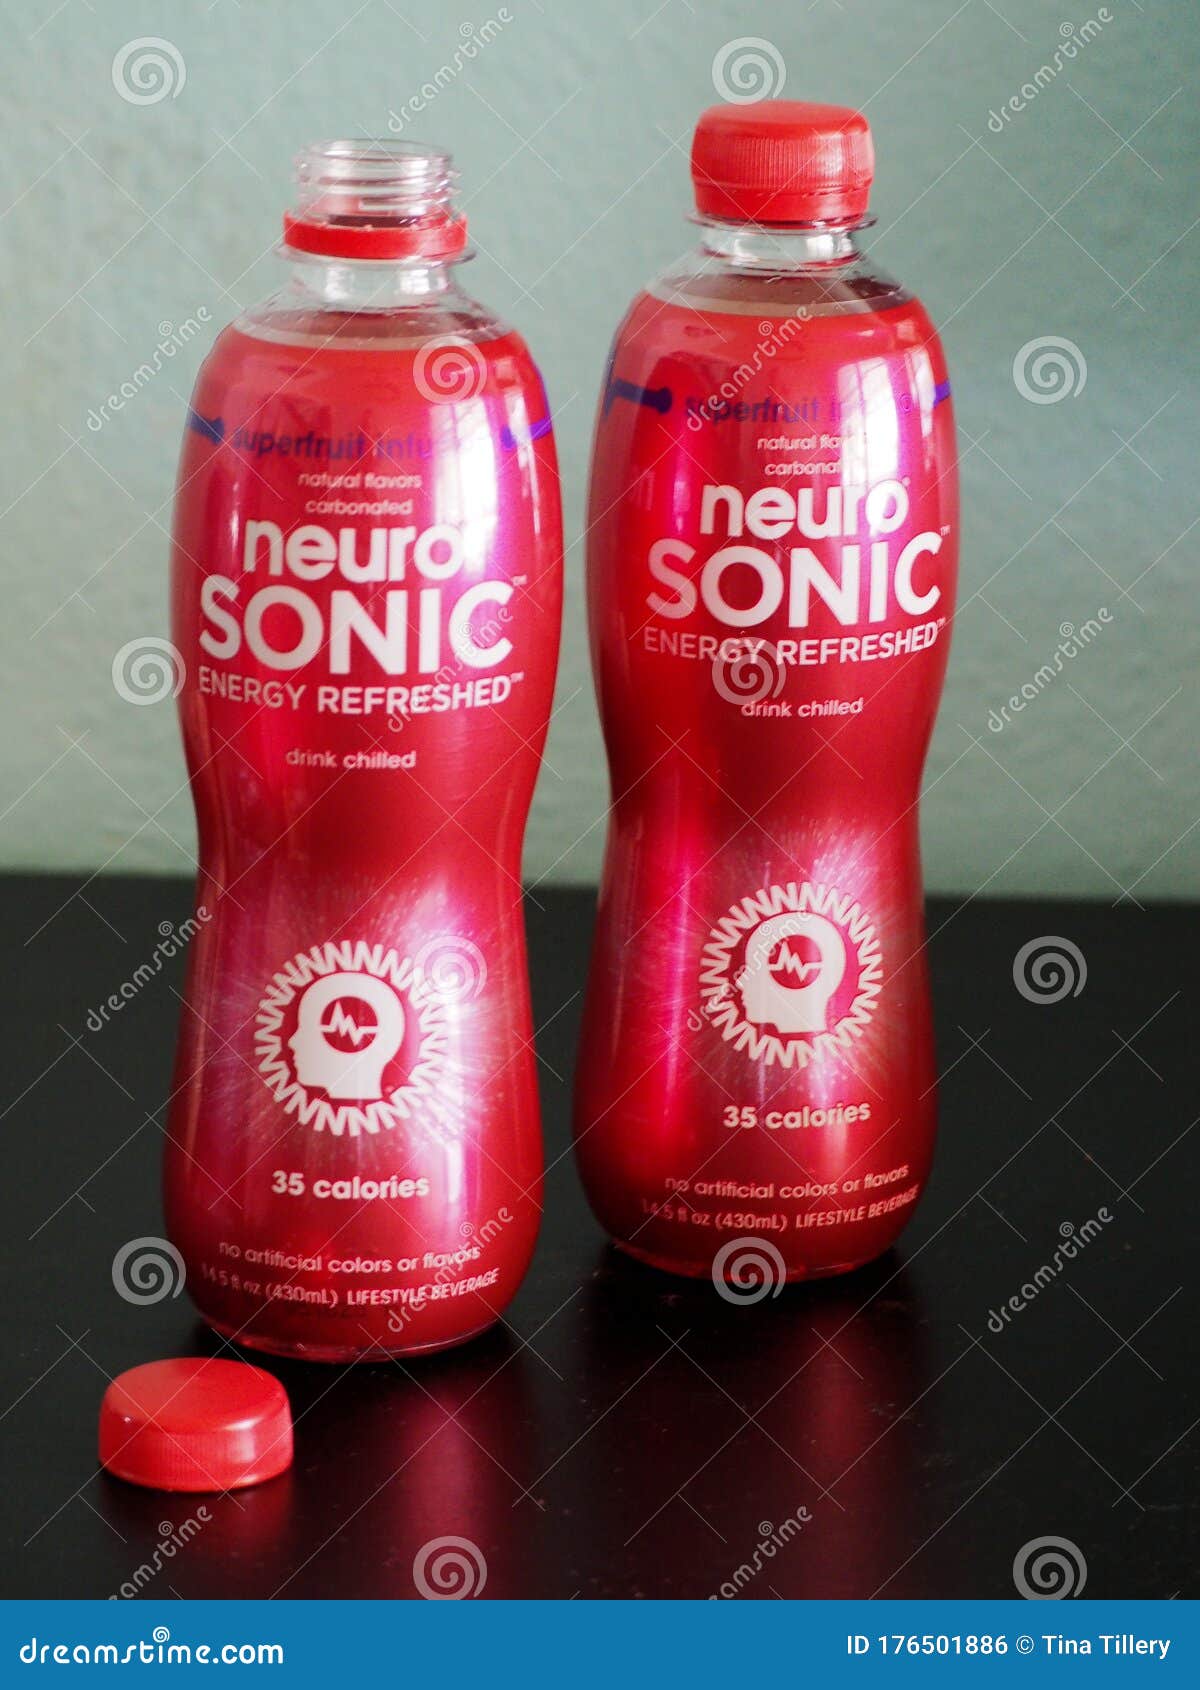 Neuro Sonic Energy Refreshed Drink Bottles Editorial Photo - Image of sonic,  carbanated: 176501886